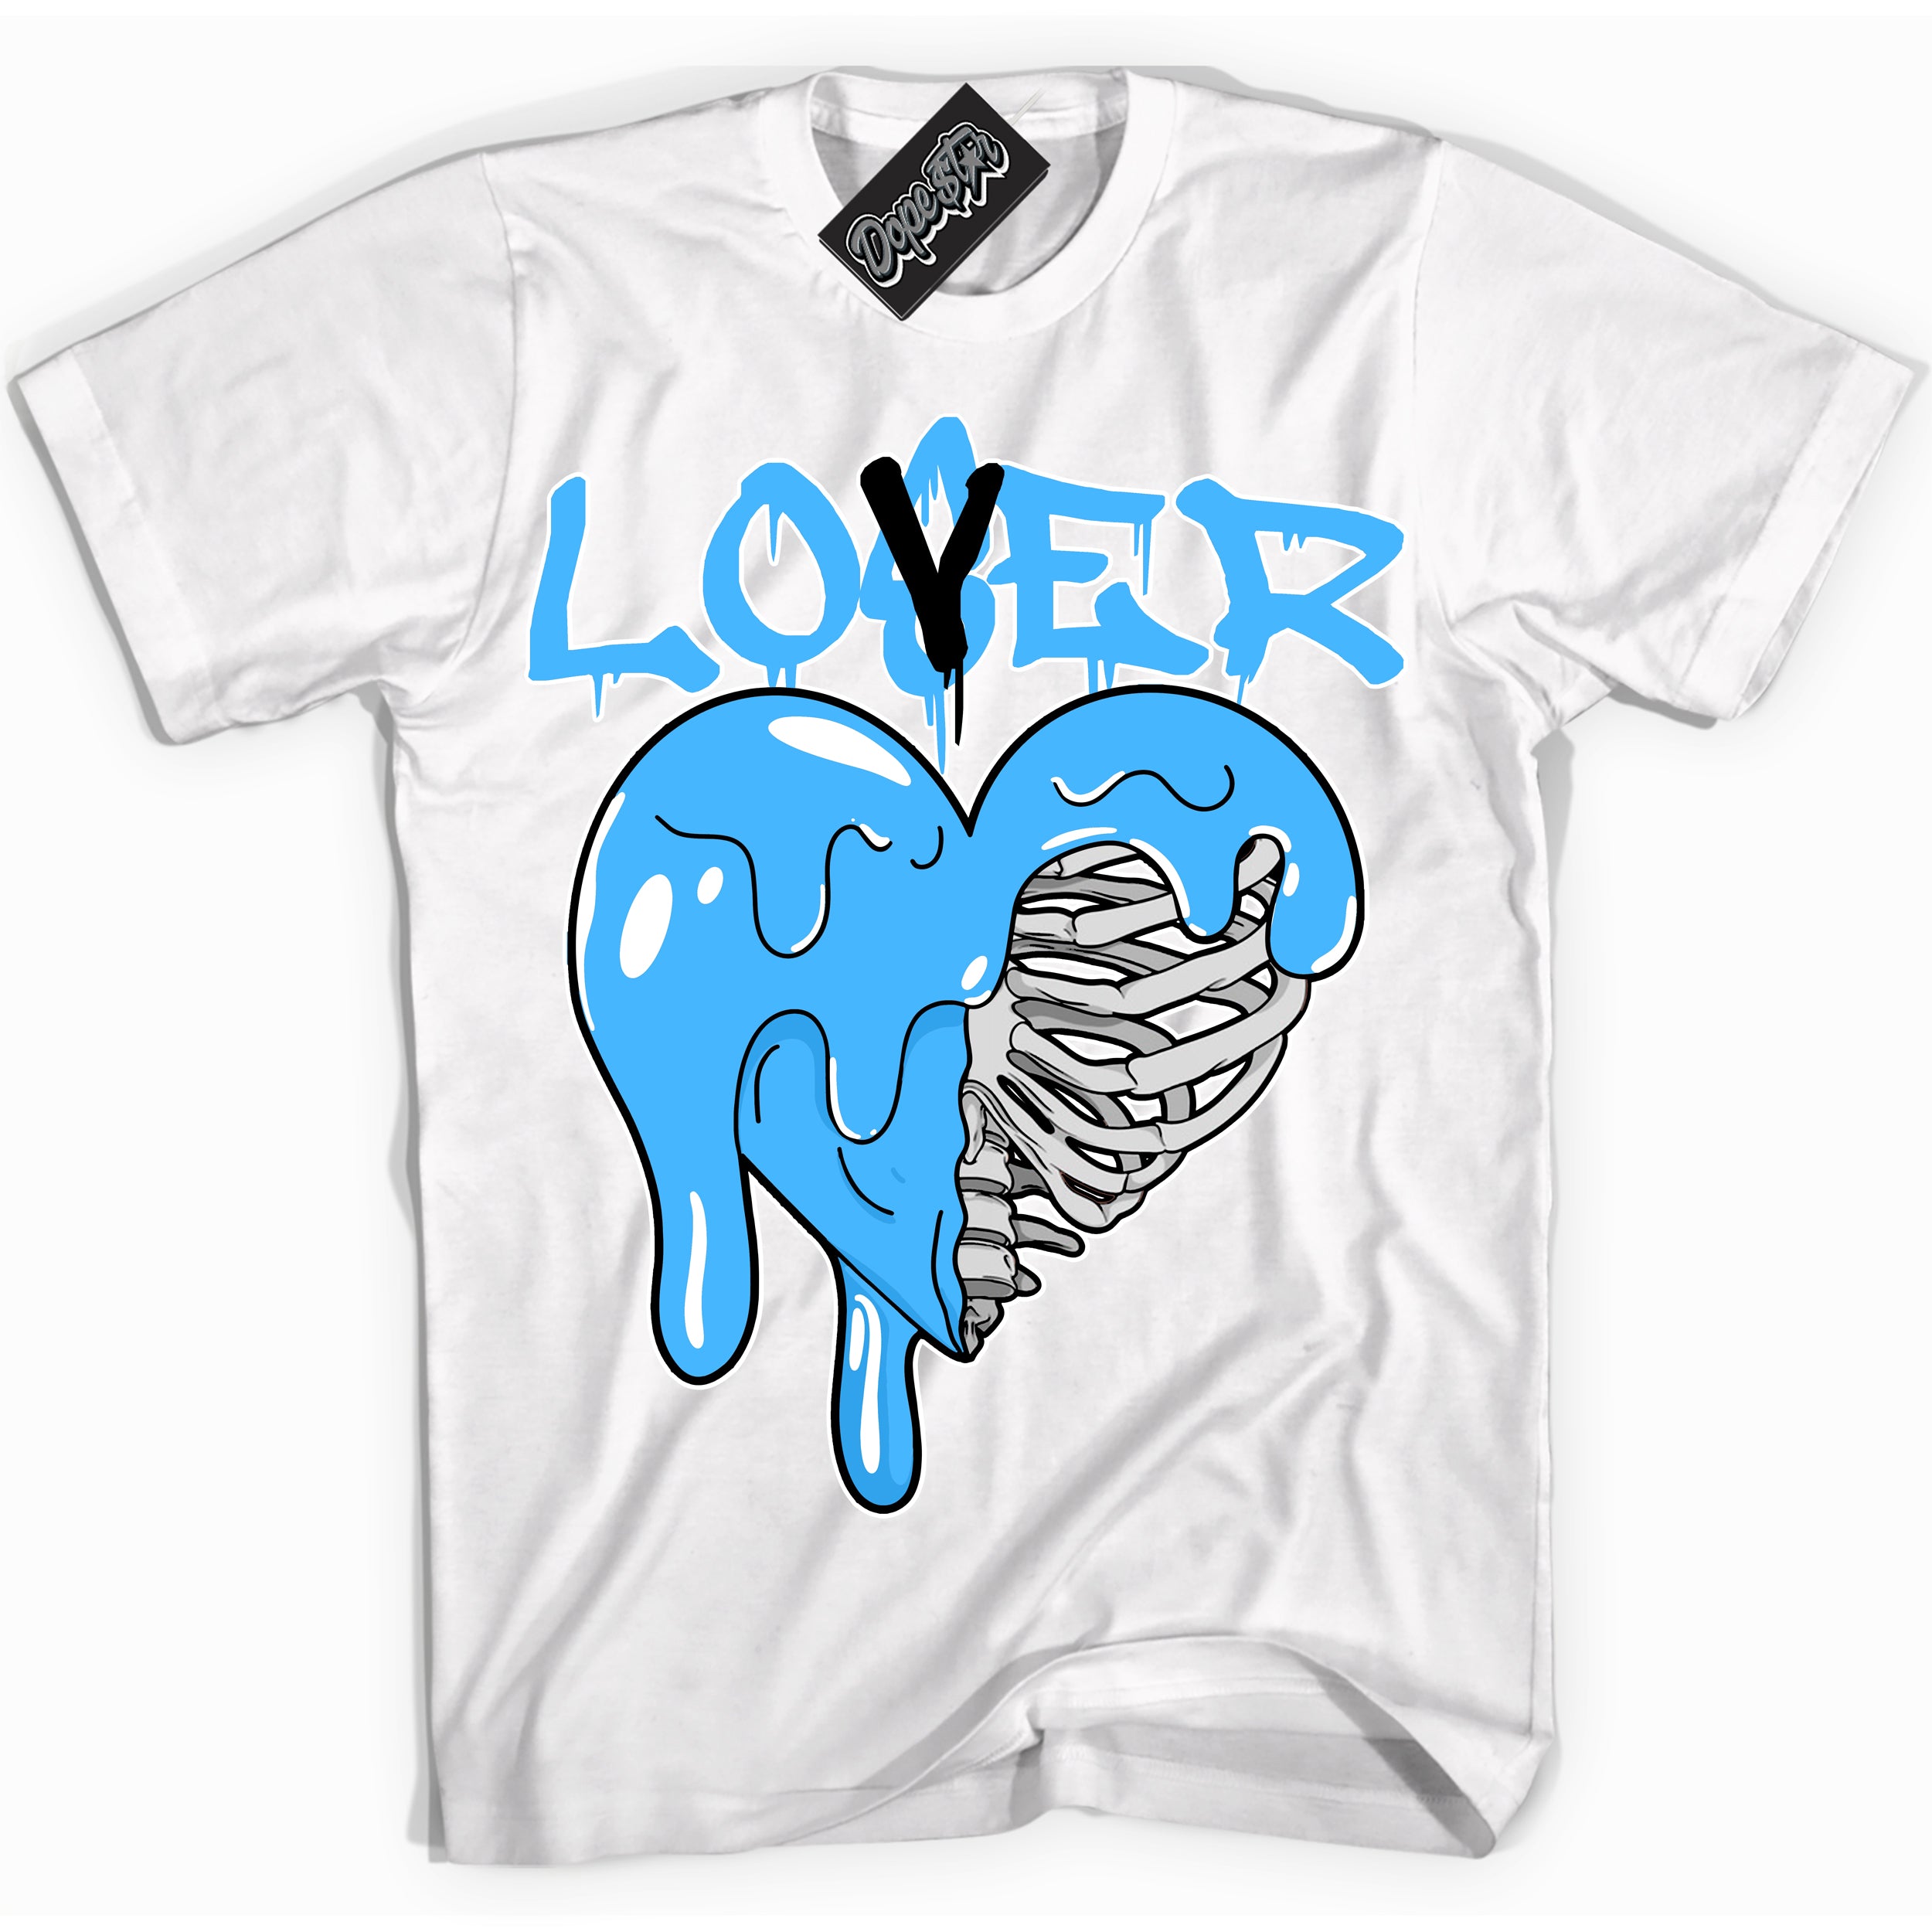 Cool White graphic tee with “ Lover Loser Heart ” design, that perfectly matches Powder Blue 9s sneakers 